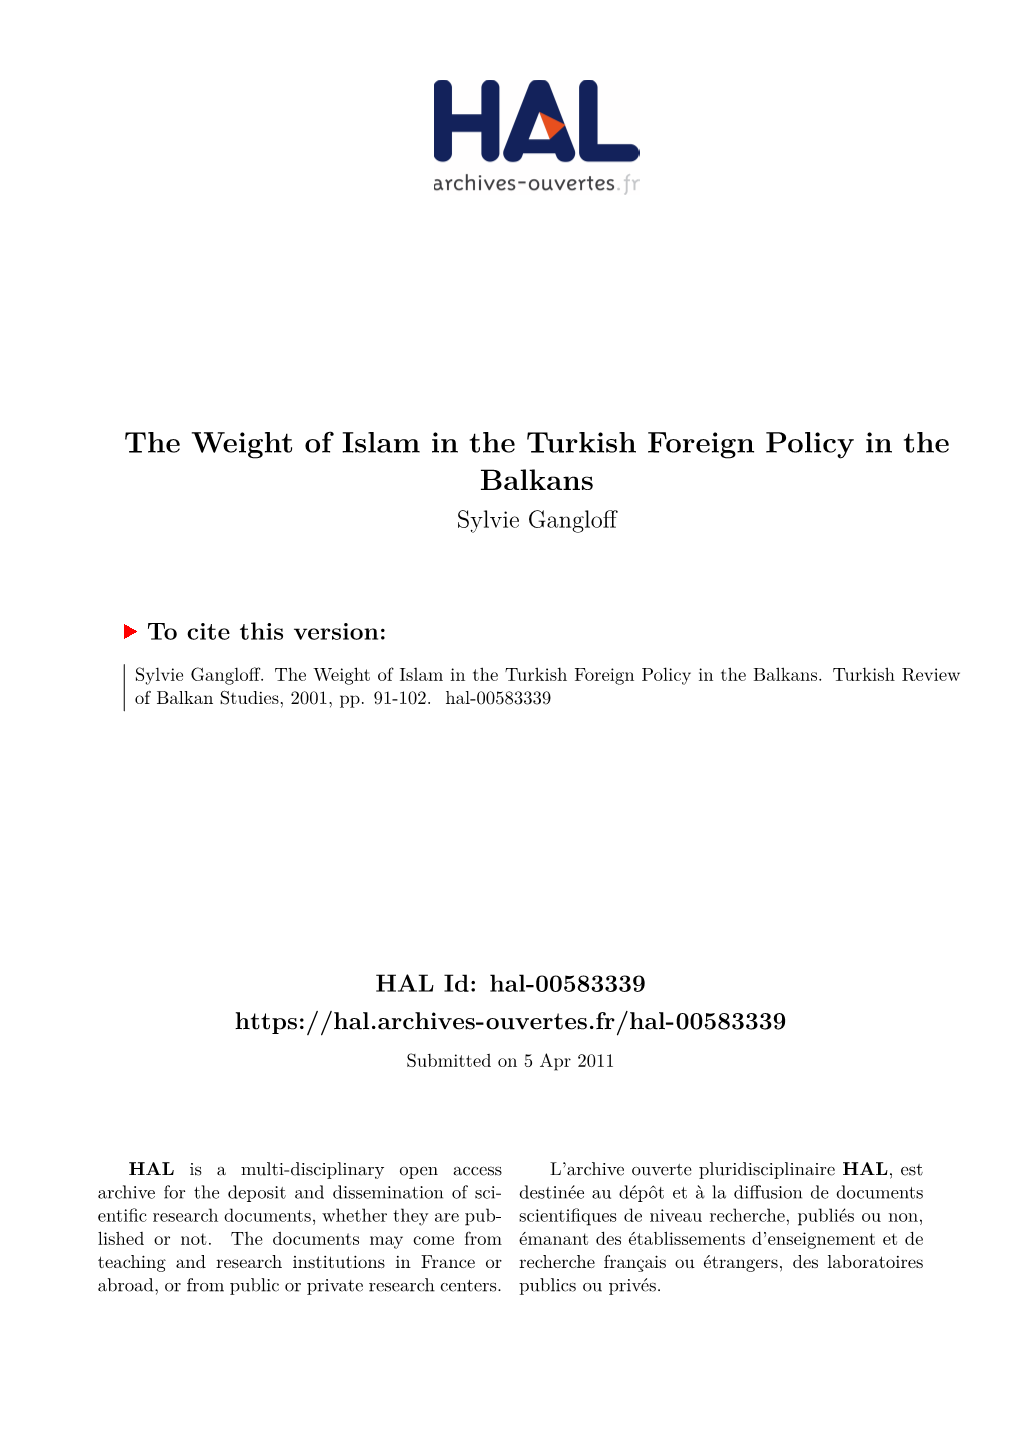 The Weight of Islam in the Turkish Foreign Policy in the Balkans Sylvie Gangloff